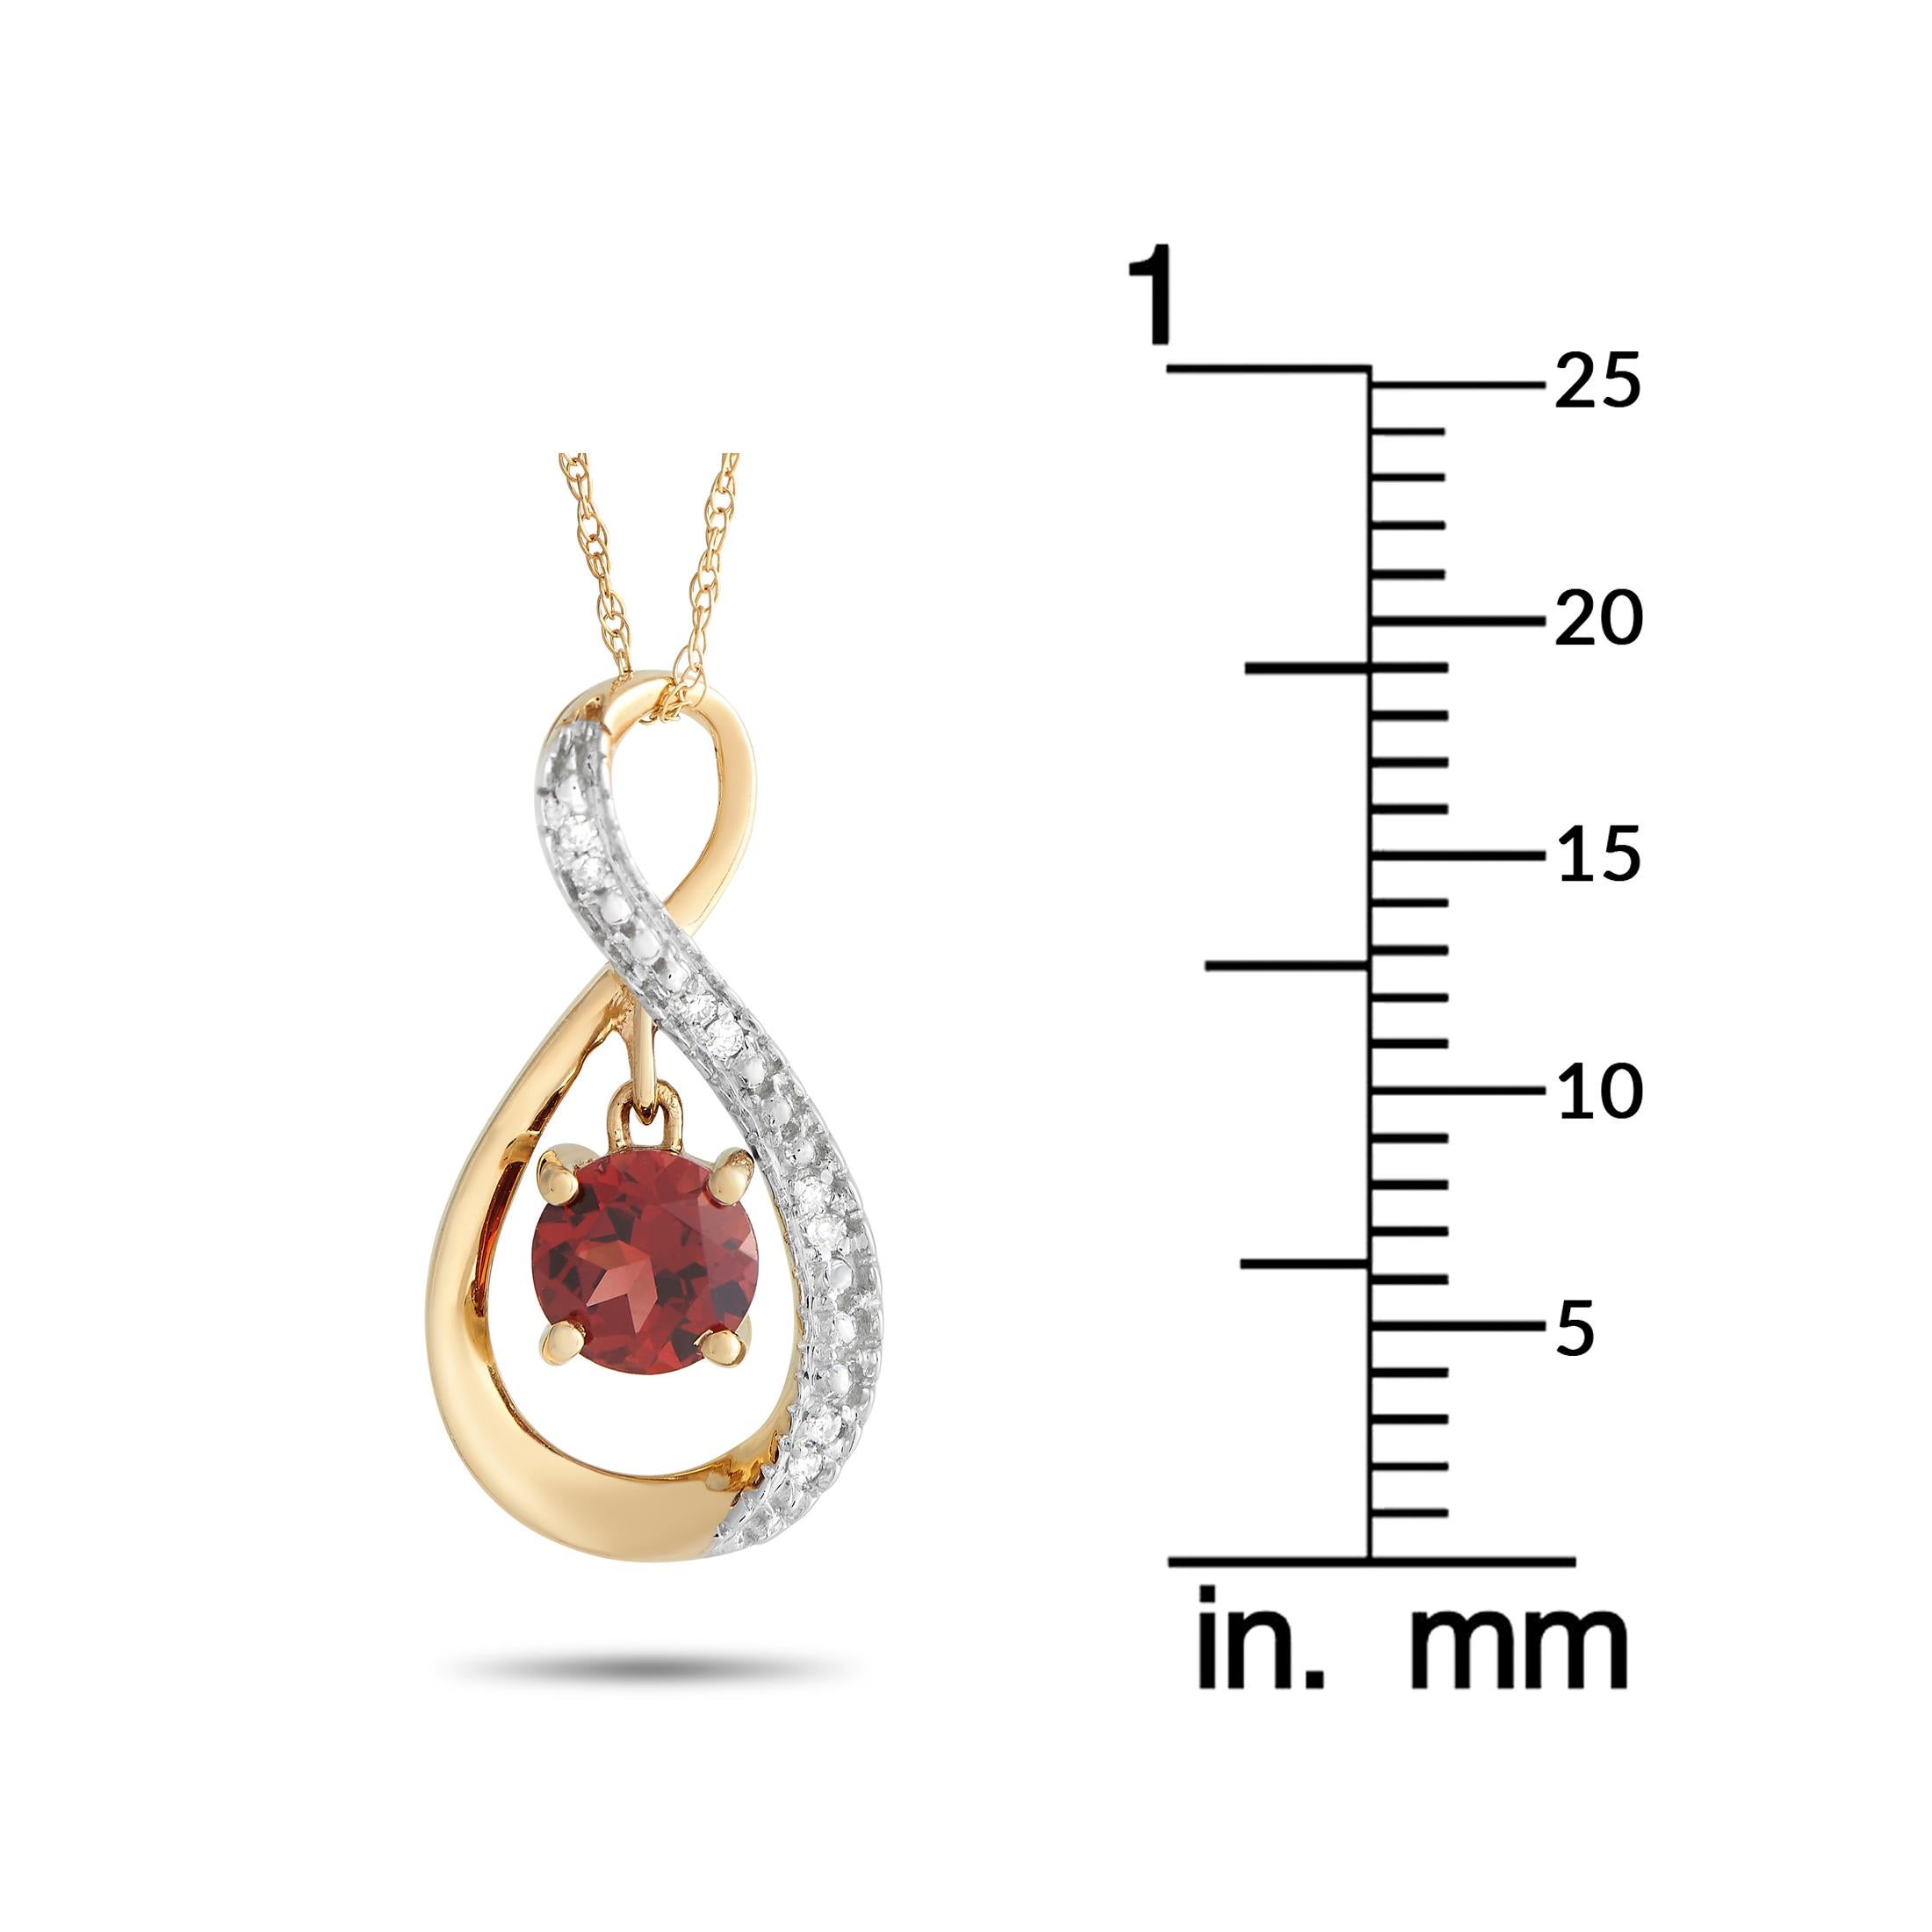 LB Exclusive 14K Yellow Gold 0.03ct Diamond and 0.03 Garnet Necklace In New Condition For Sale In Southampton, PA